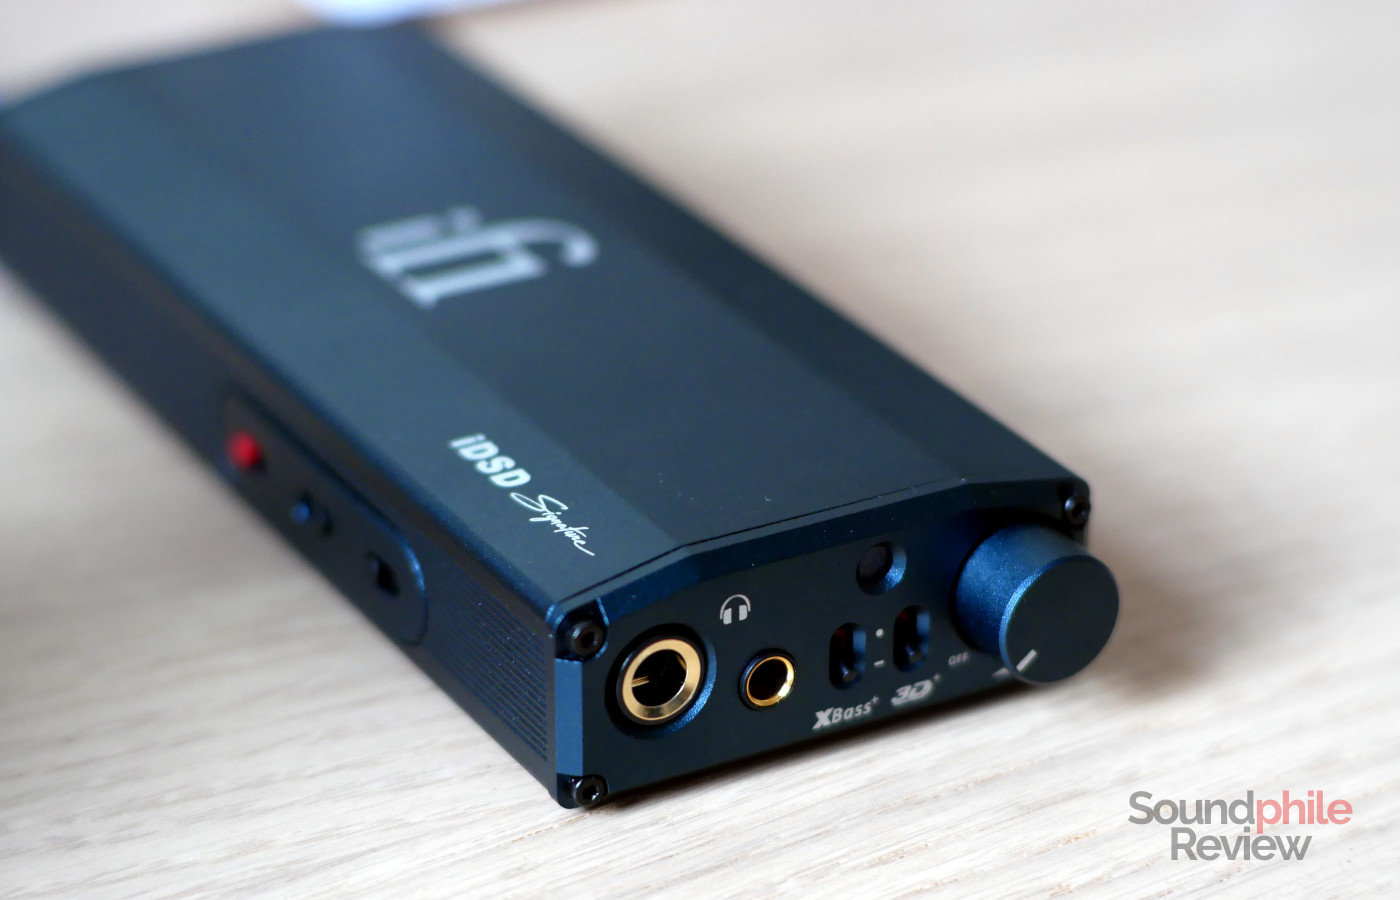 iFi micro Signature review: revamped - Soundphile Review